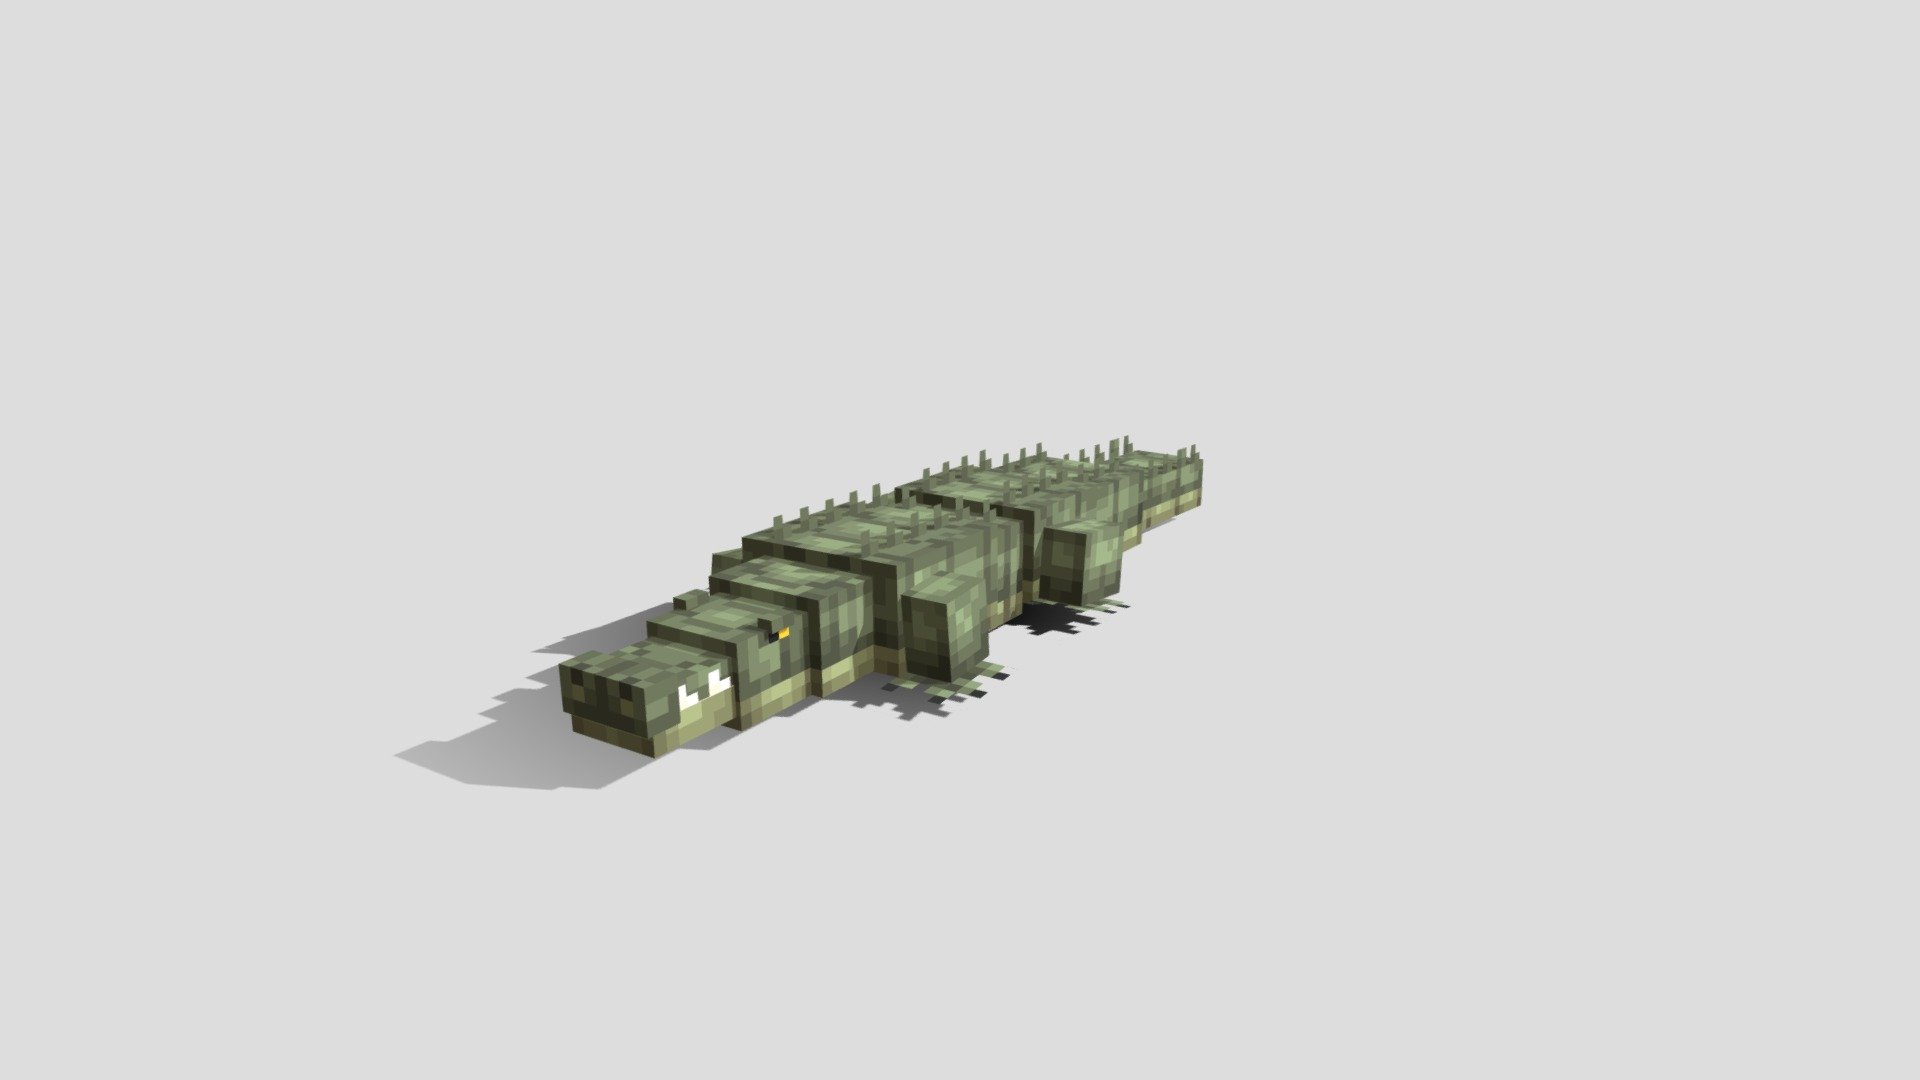 Crocodile - Minecraft animal mob #BlockBench

Want to have a custom model? Contact: wasteland4013 (Discord)|Comms Open - Crocodile - Minecraft animal #BlockBench - 3D model by W'Projects (@wprojects) 3d model